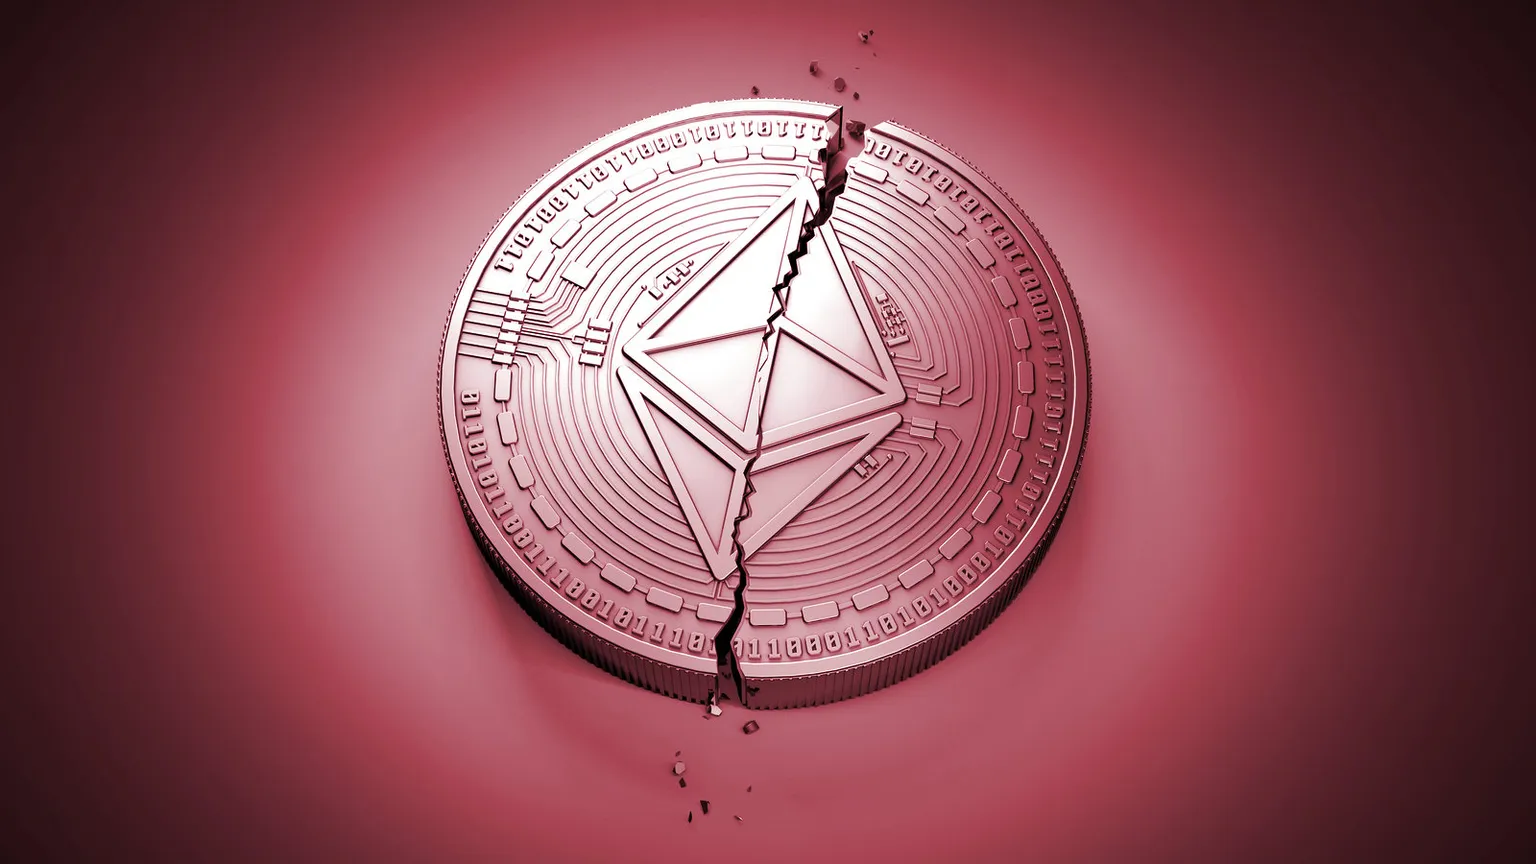 Ethereum is going through some things. Image: Shutterstock